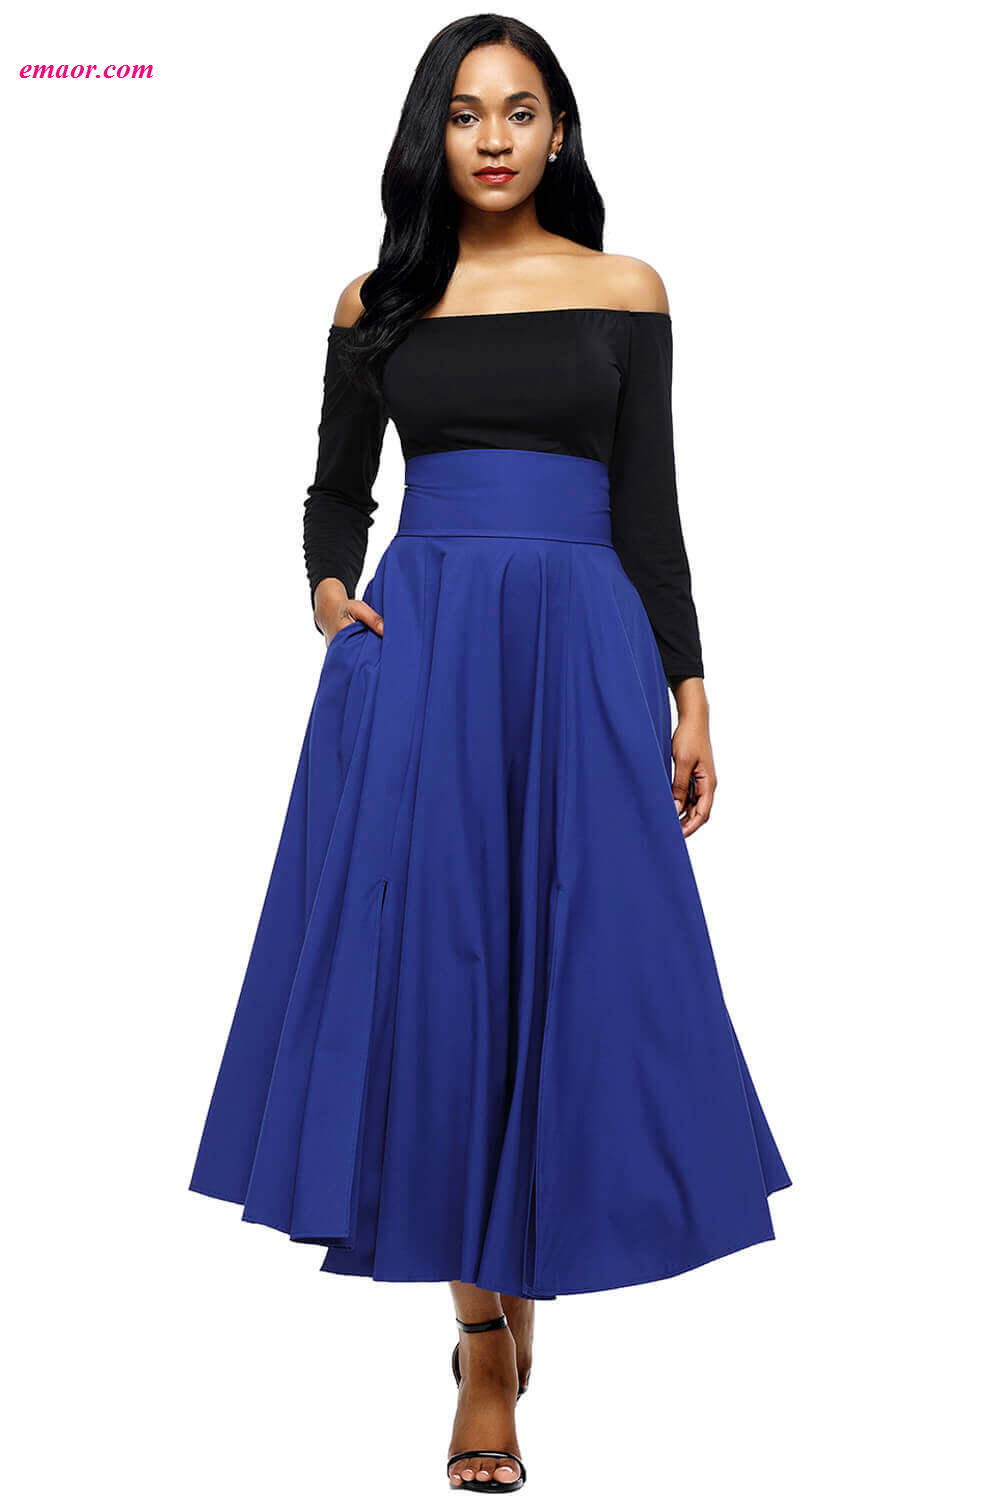  Retro High Waist Pleated Belted Hot Maxi Skirt on Sale